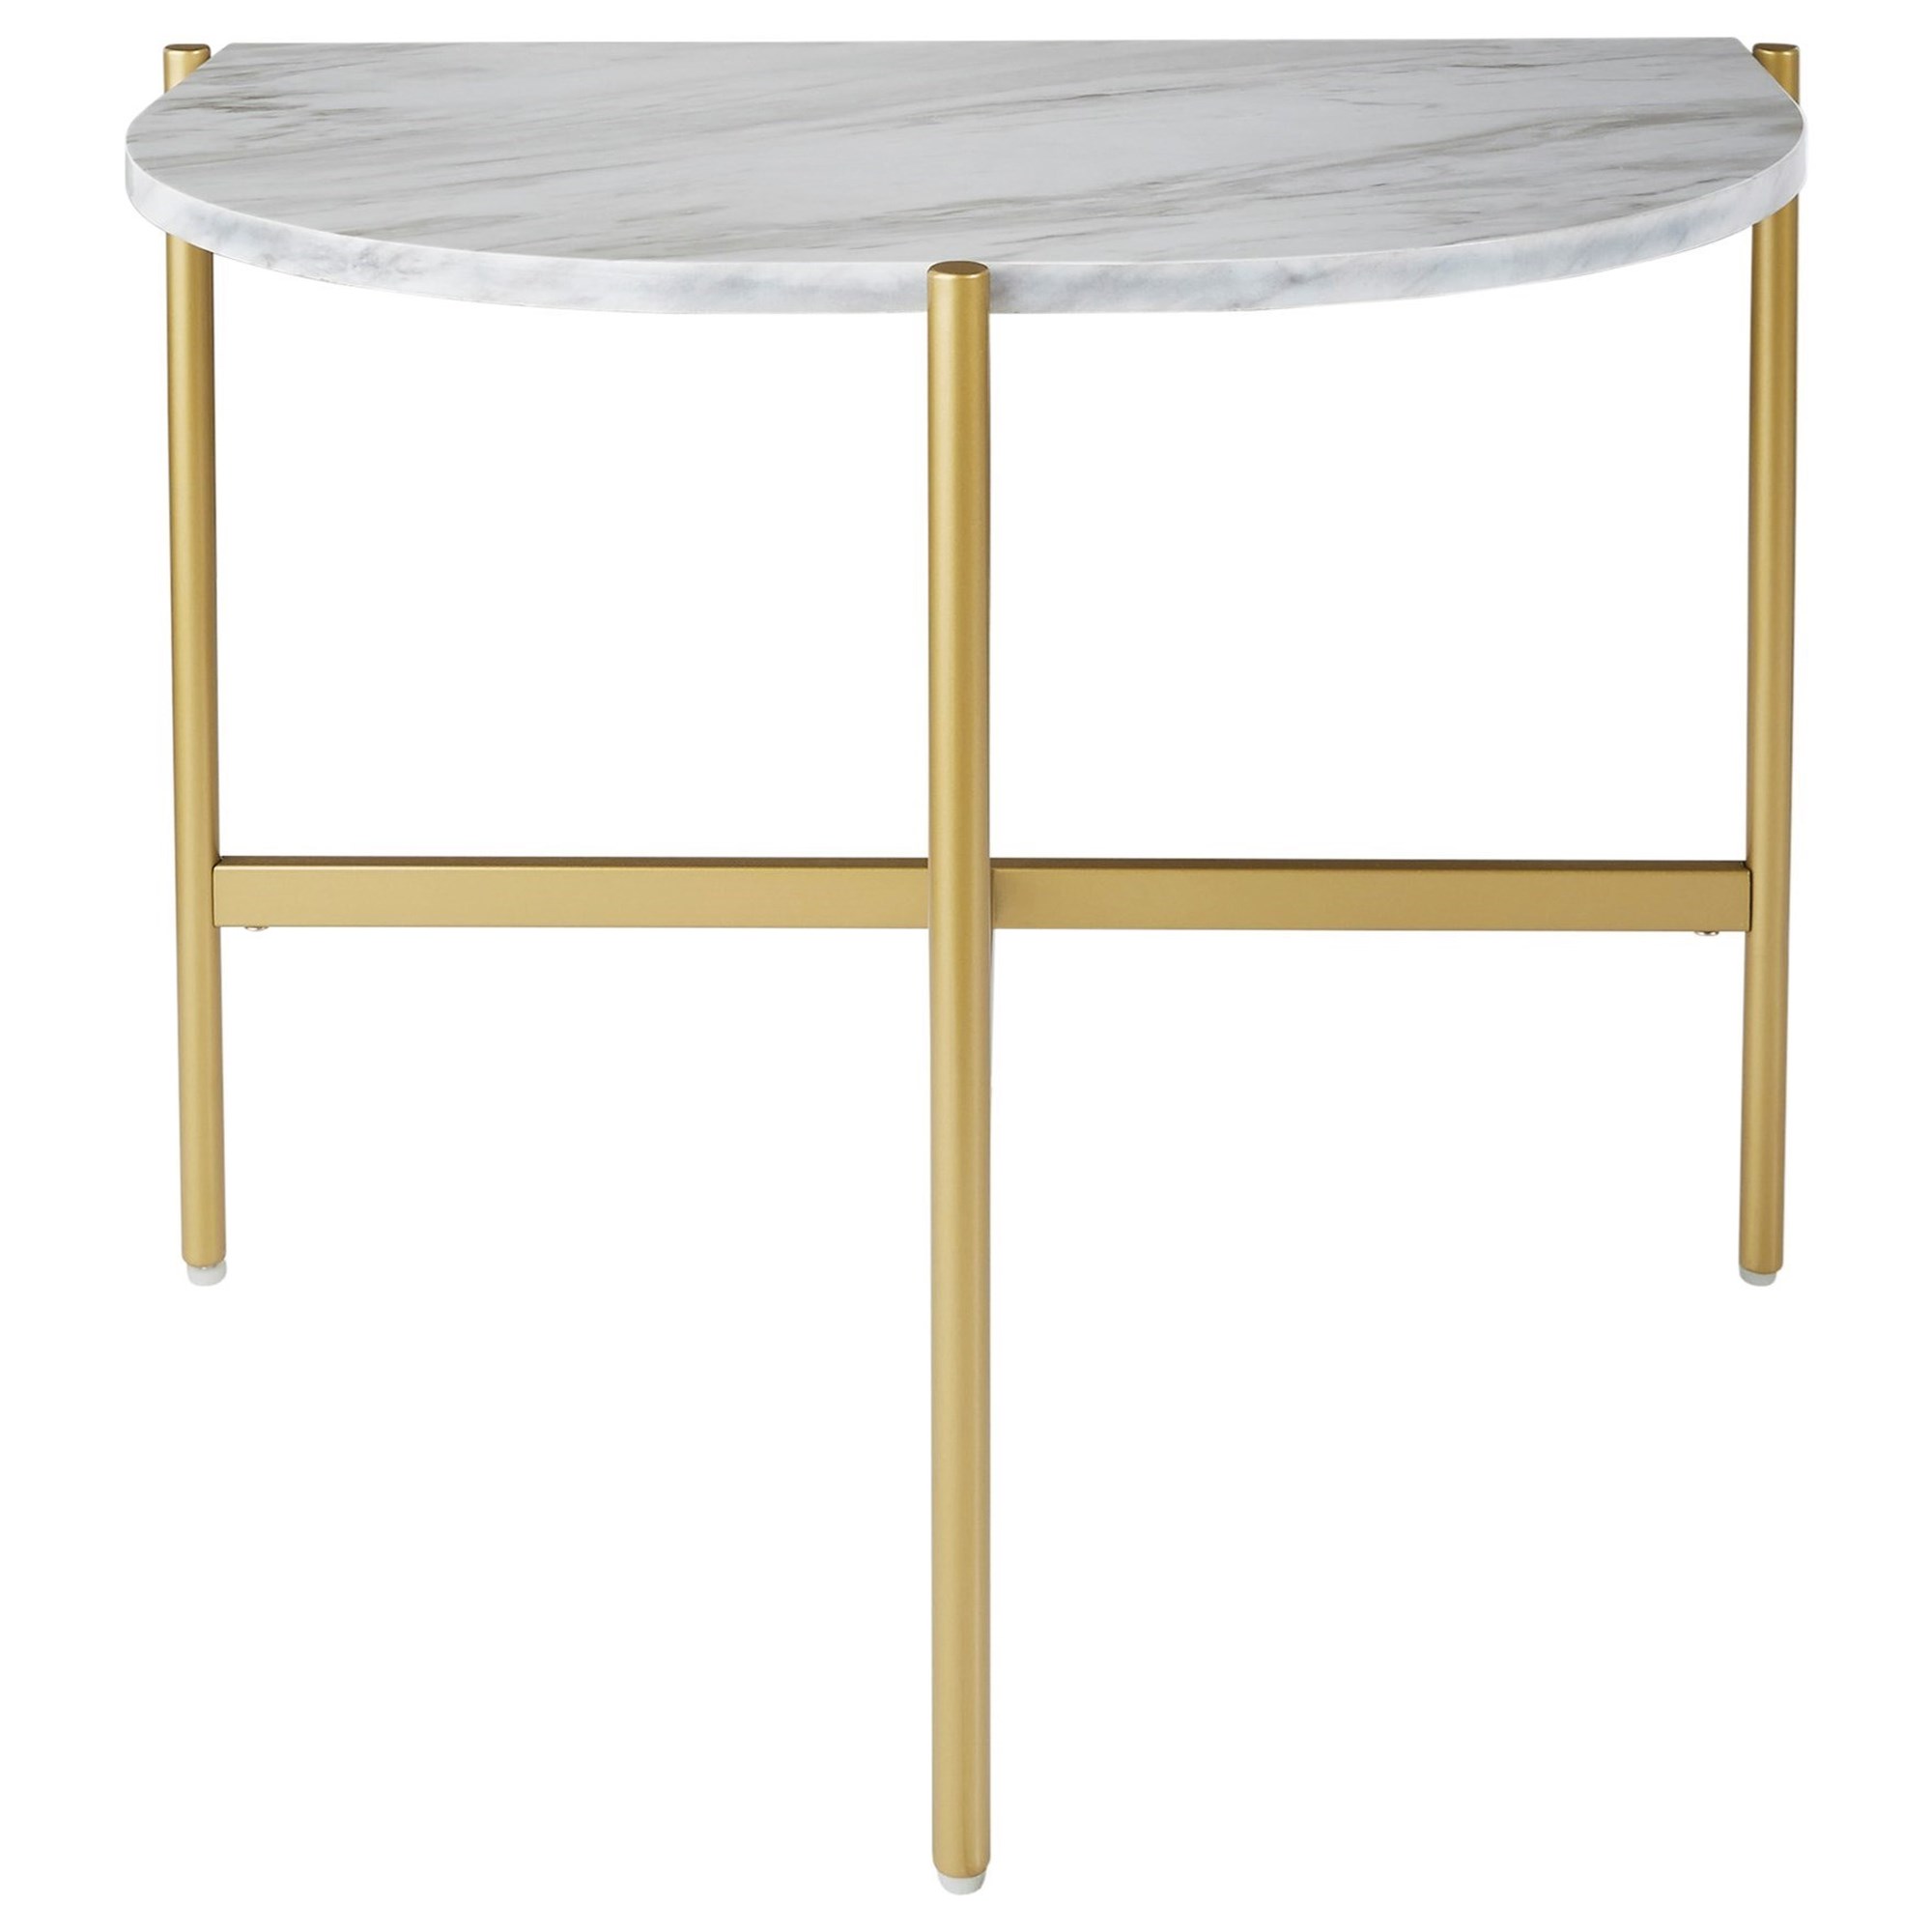 Signature Design by Ashley Wynora T192-7 Gold Finish Half-Round Chair Side  End Table with Faux Marble Top | HomeWorld Furniture | End Tables